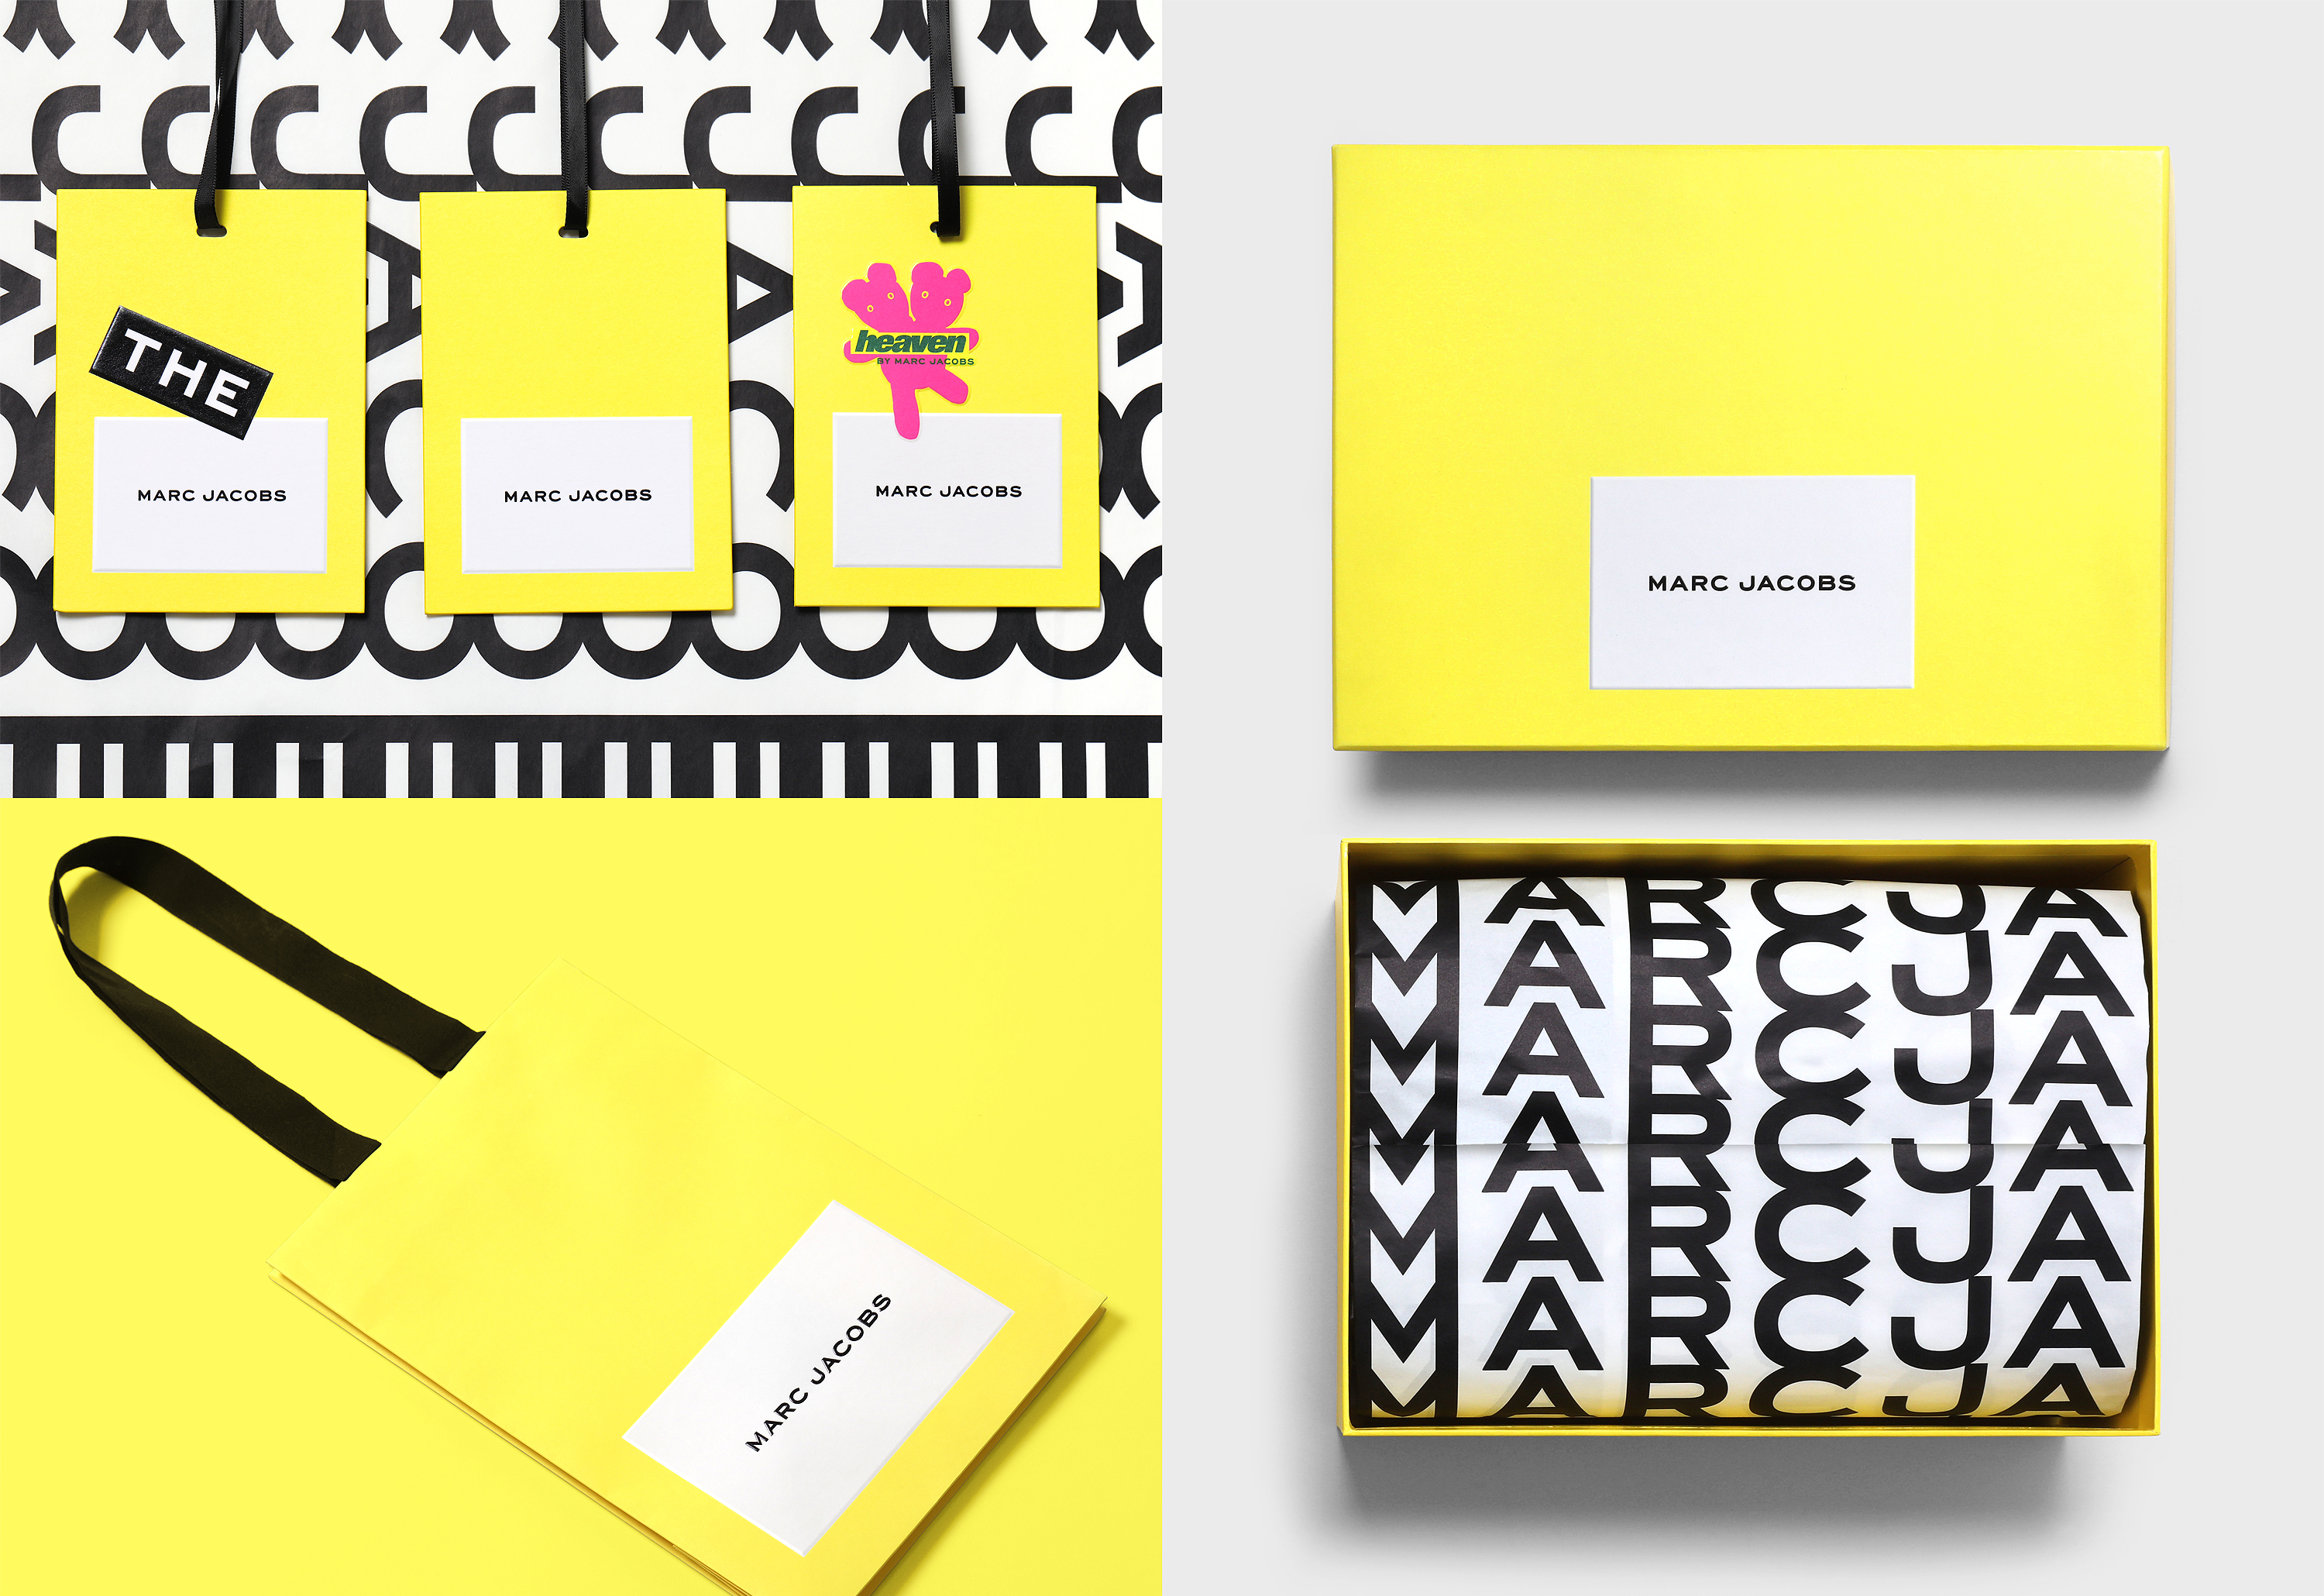 New brand identity and packaging for Marc Jacobs by New York design studio Triboro